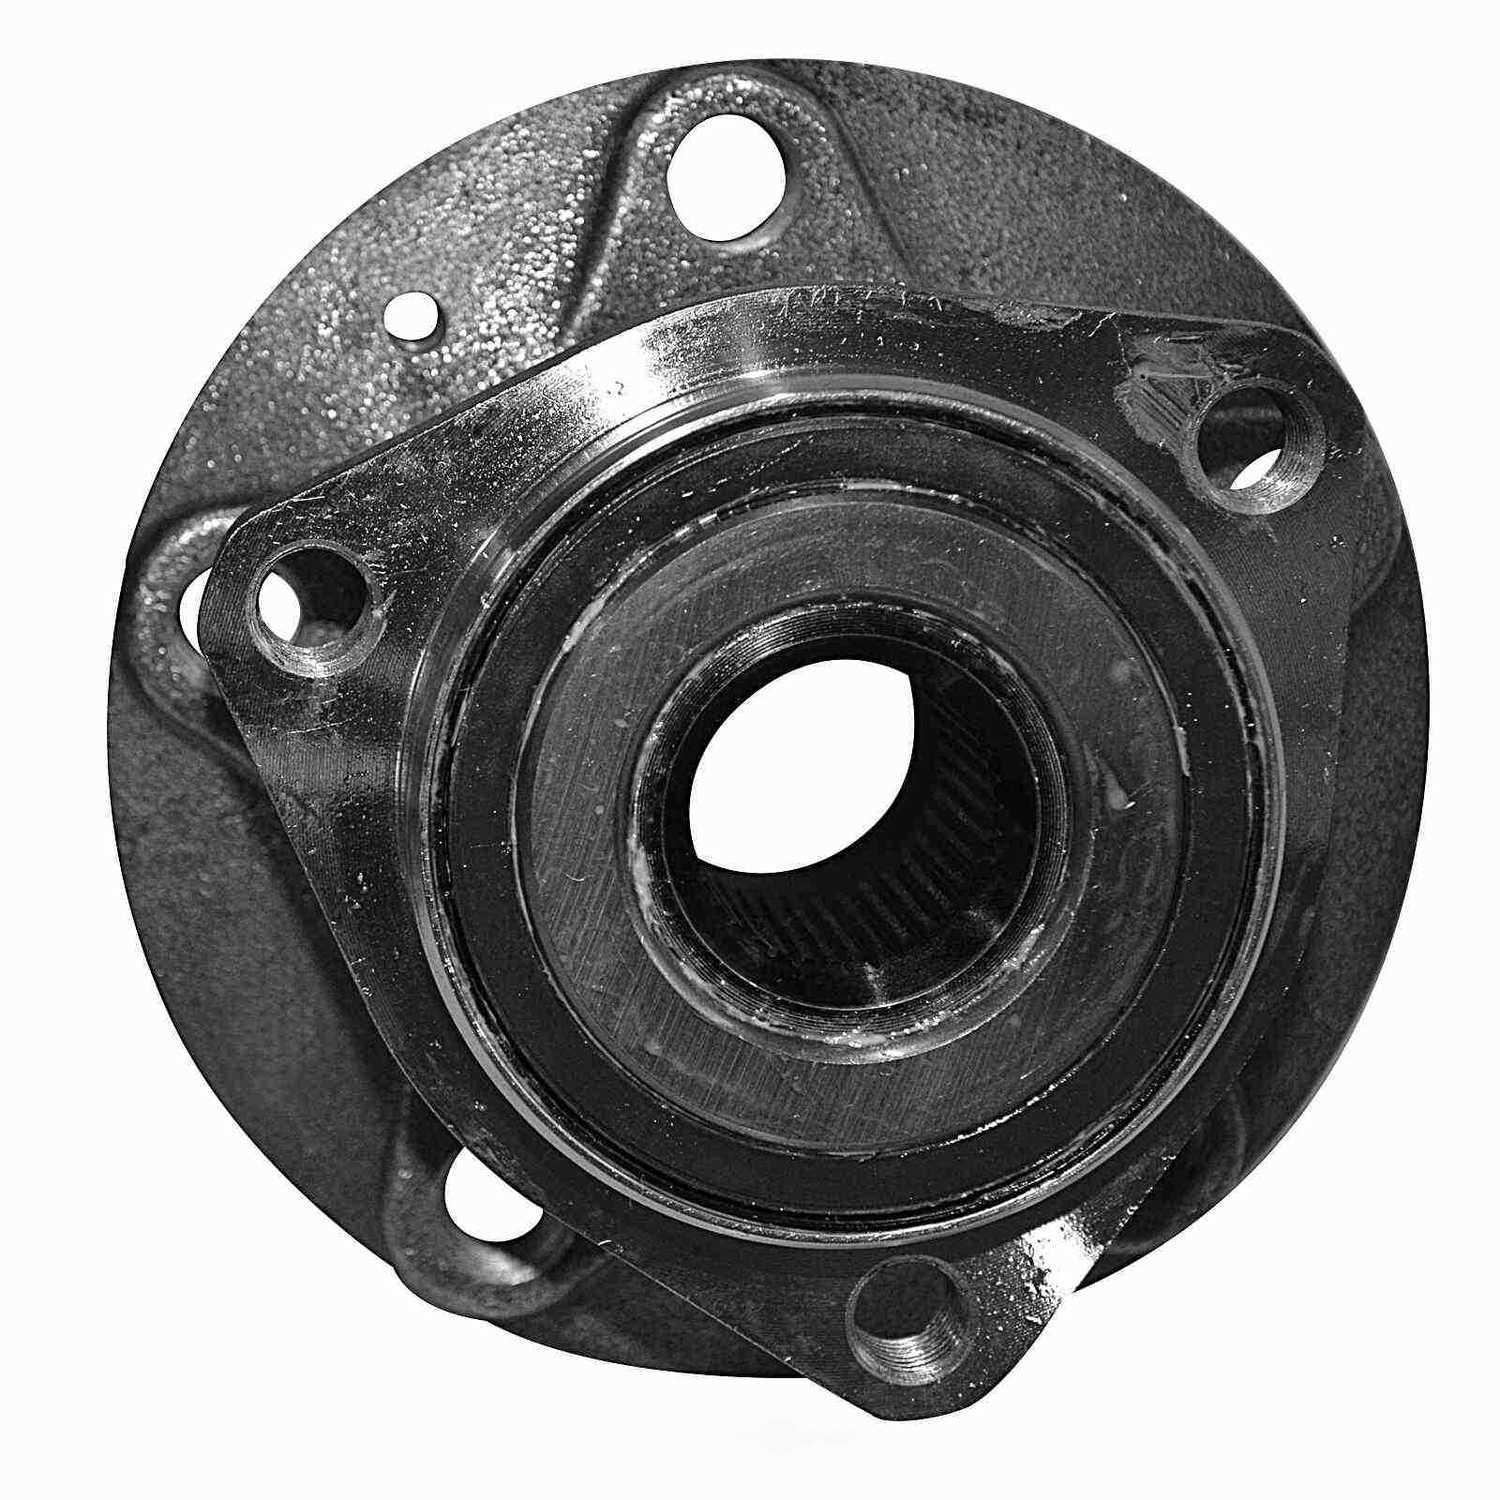 GSP NORTH AMERICA INC. - GSP Axle Bearing & Hub Assembly - AD8 234262